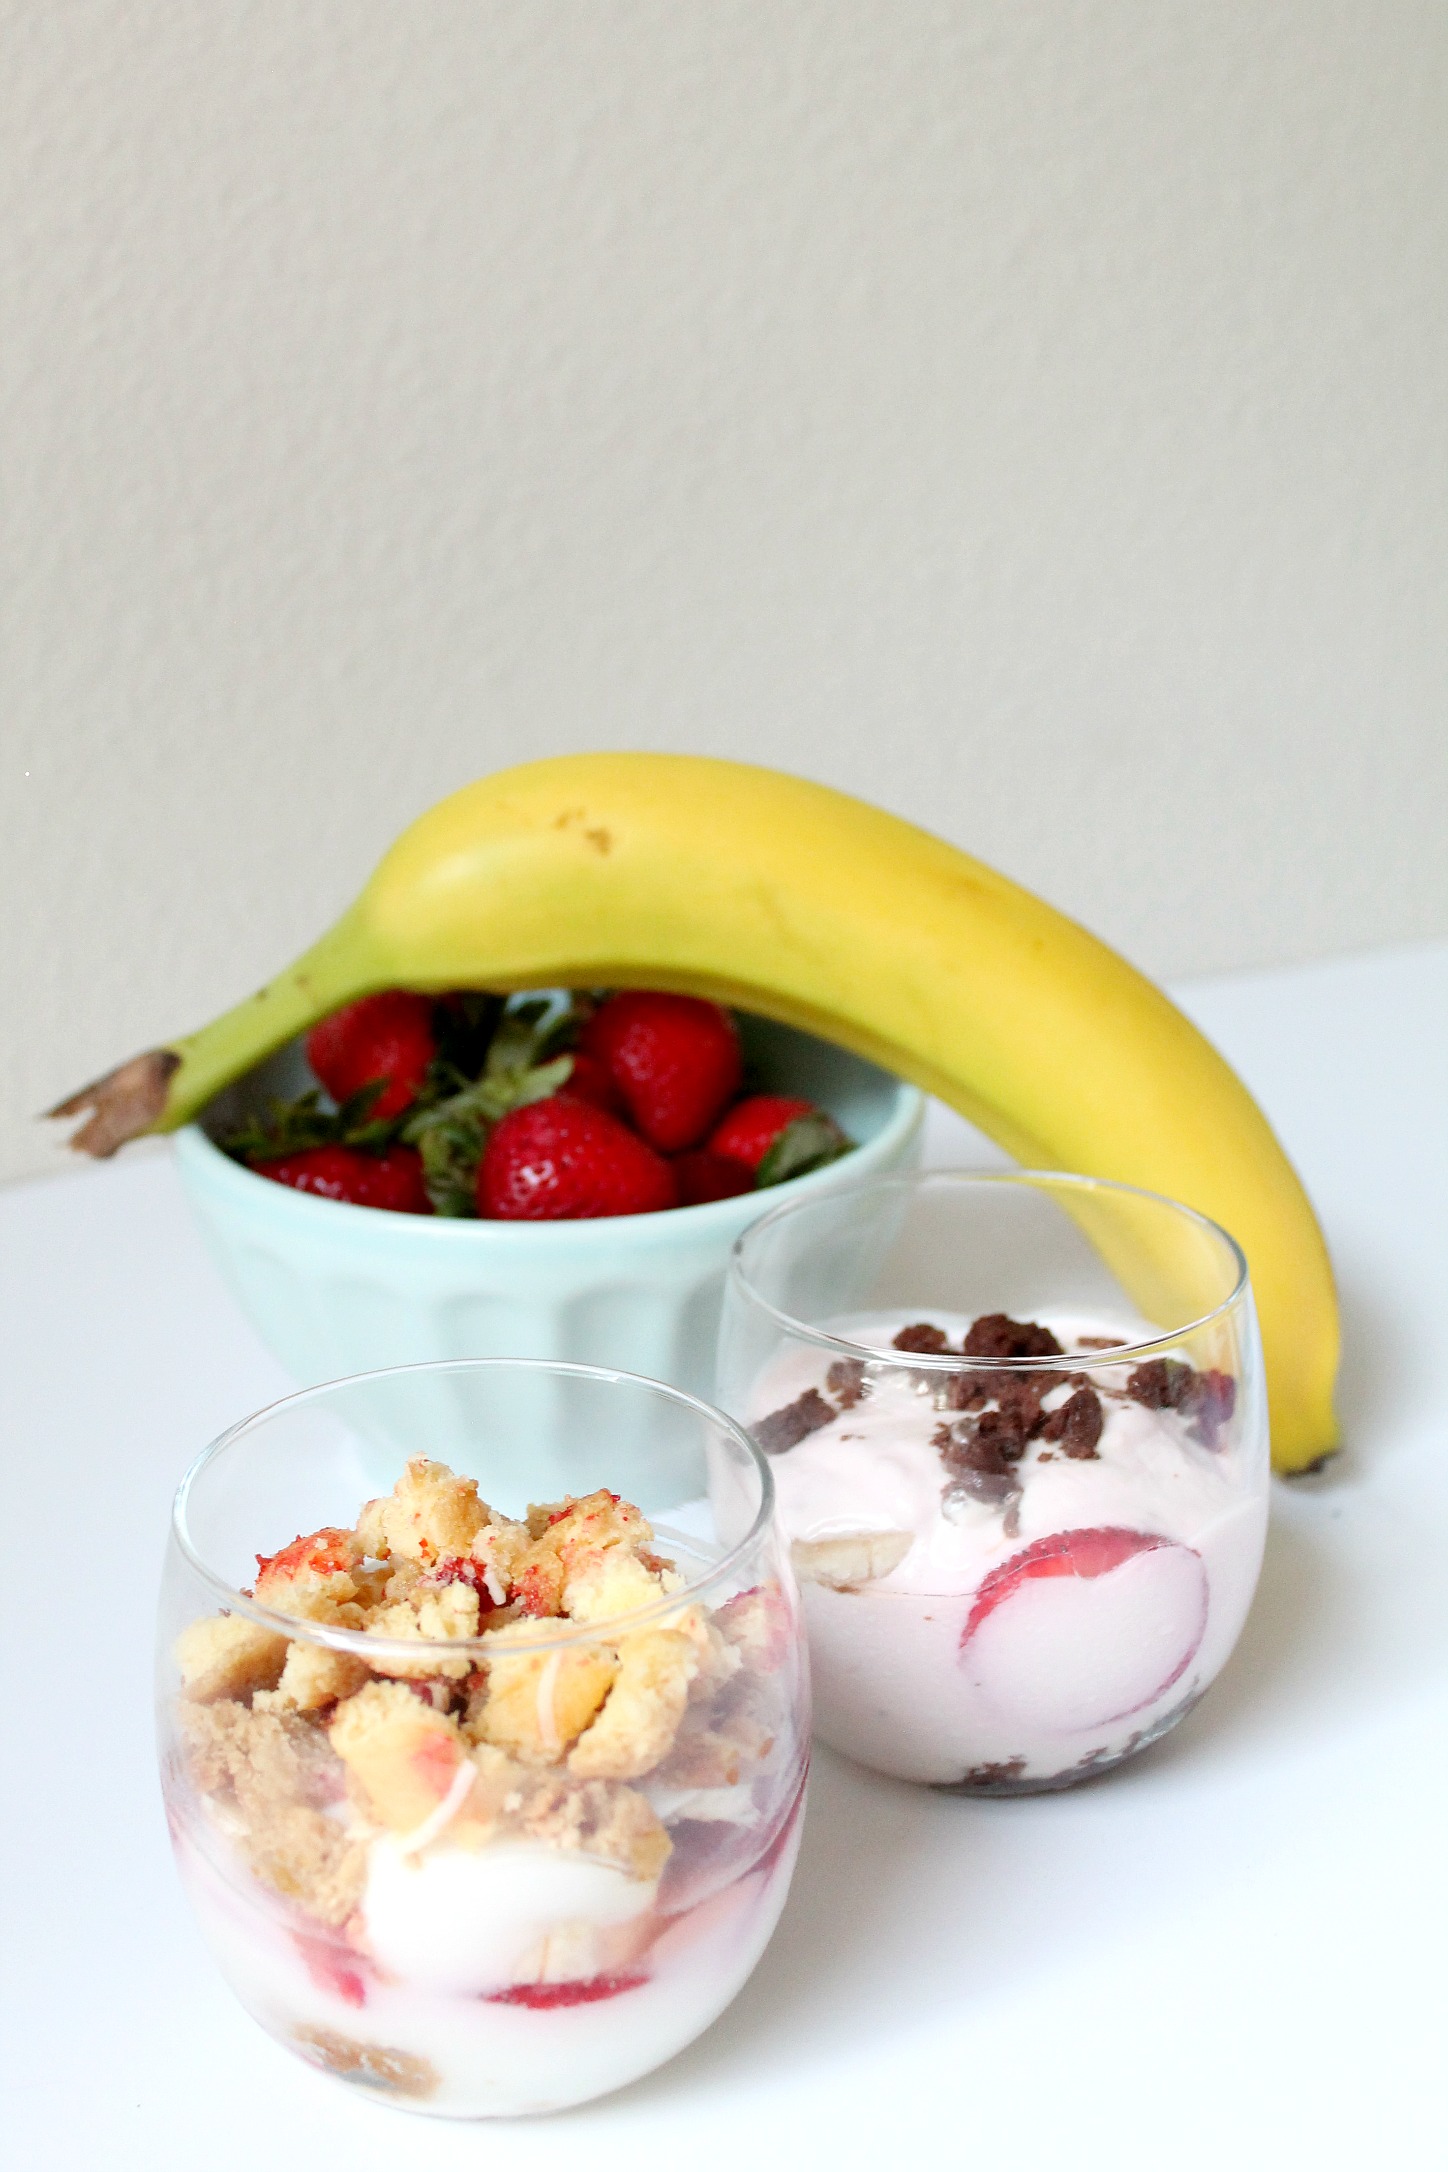 Delicious Strawberry Cheesecake Parfait and Banana Split Brownie Parfait. Healthy and easy dessert! Indulge without the guilt!